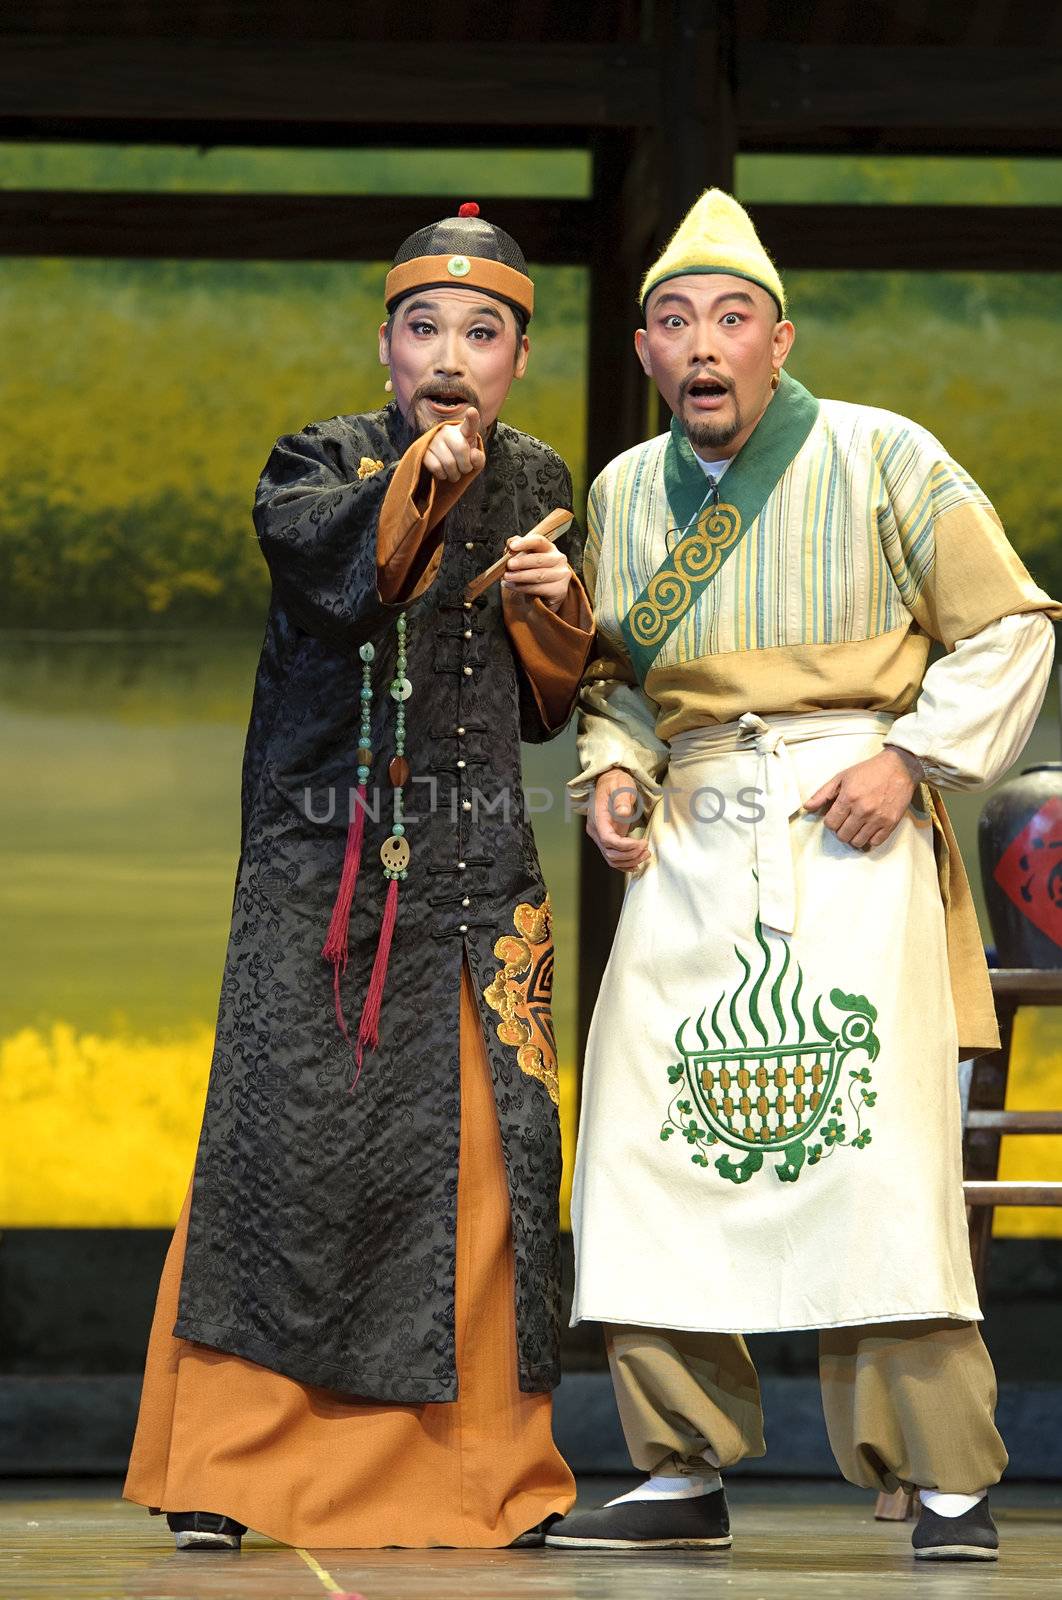 CHENGDU - JUN 7: Chinese Yue opera performer make a show on stage to compete for awards in 25th Chinese Drama Plum Blossom Award competition at Shengge theater.Jun 7, 2011 in Chengdu, China.
Chinese Drama Plum Blossom Award is the highest theatrical award in China.